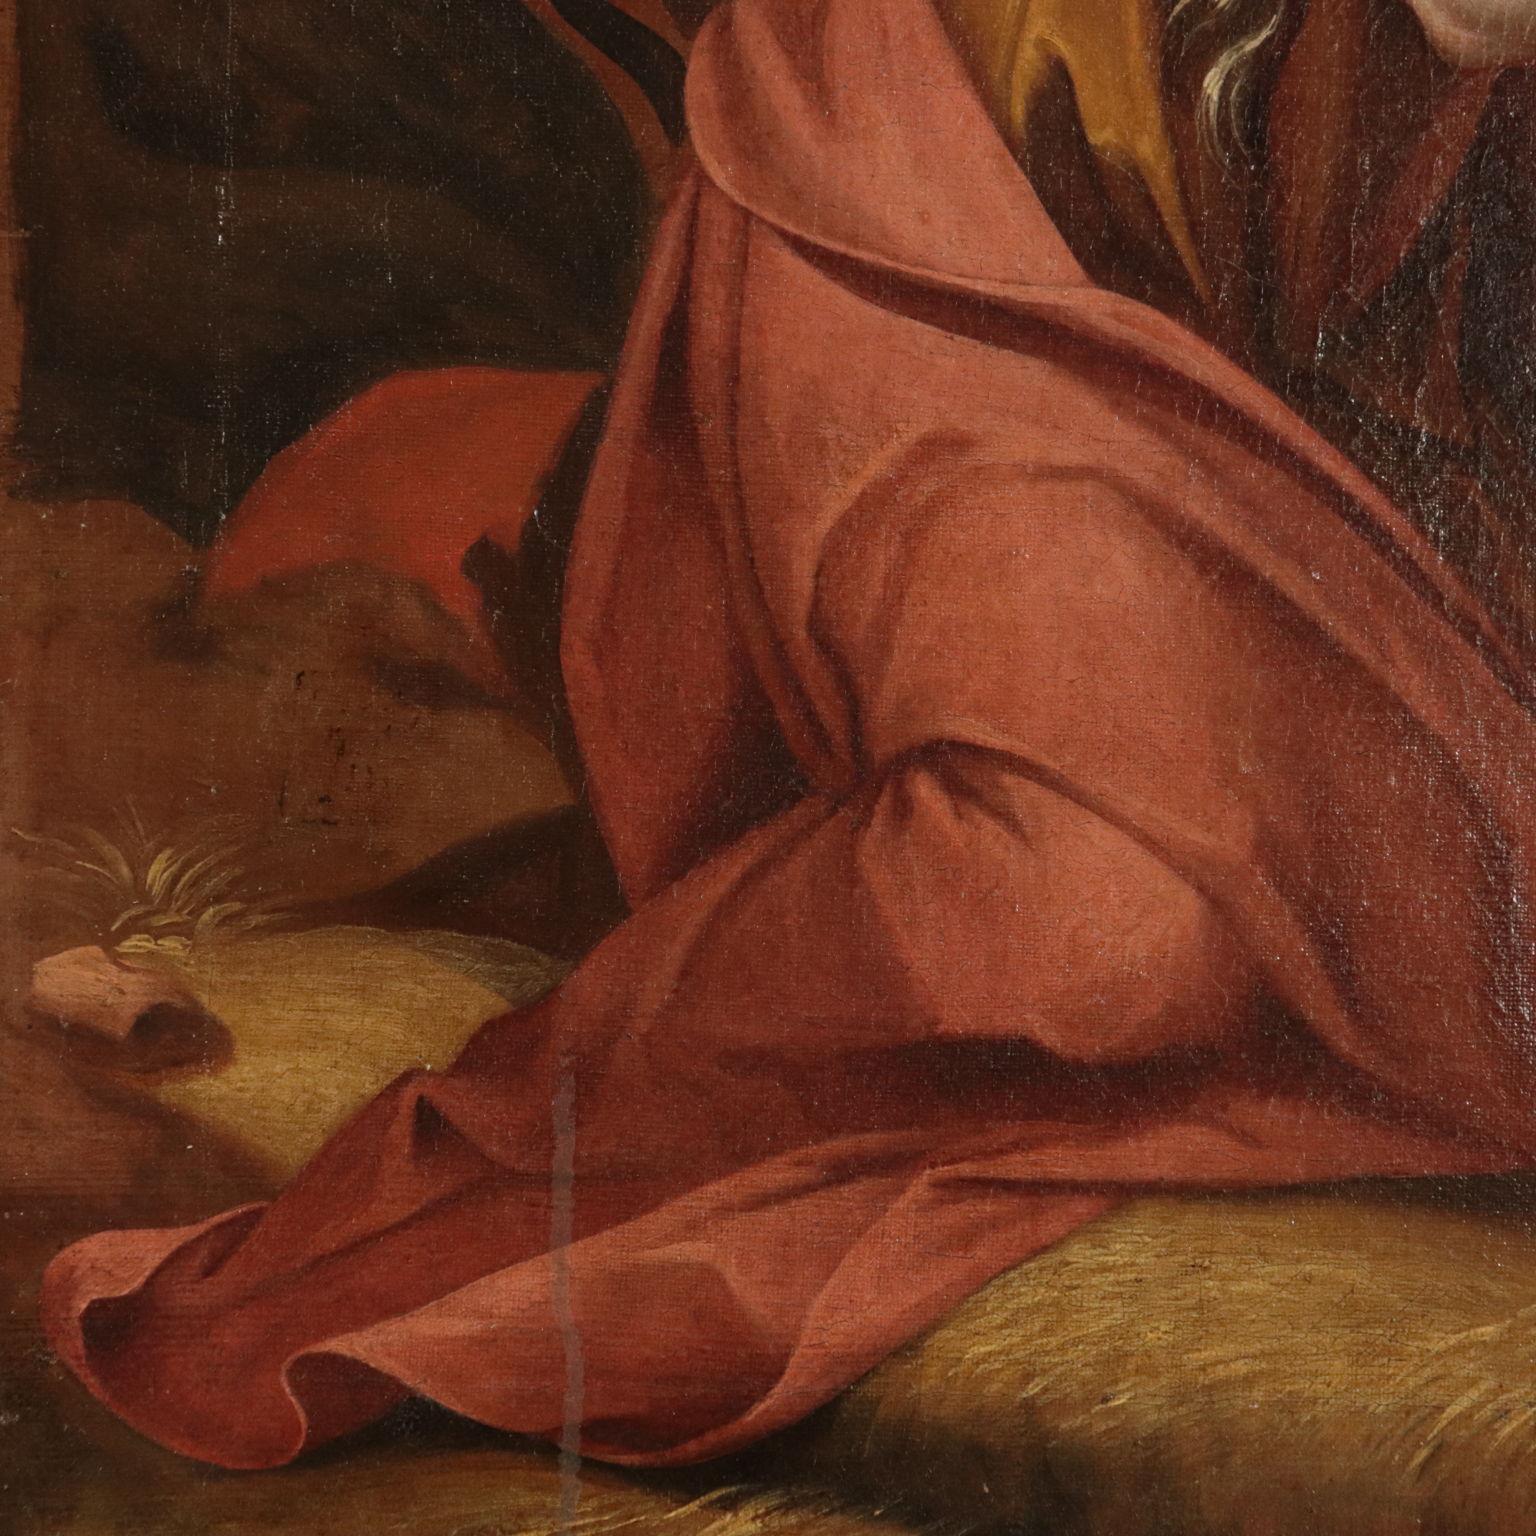 Oil on canvas. Flemish School. Magdalene is represented with her iconographical symbols: in the desert, half-dressed and with her hair down, with the book of Holy Scriptures and in an attitude of ecstasy; next to her there is a skull, symbol of 